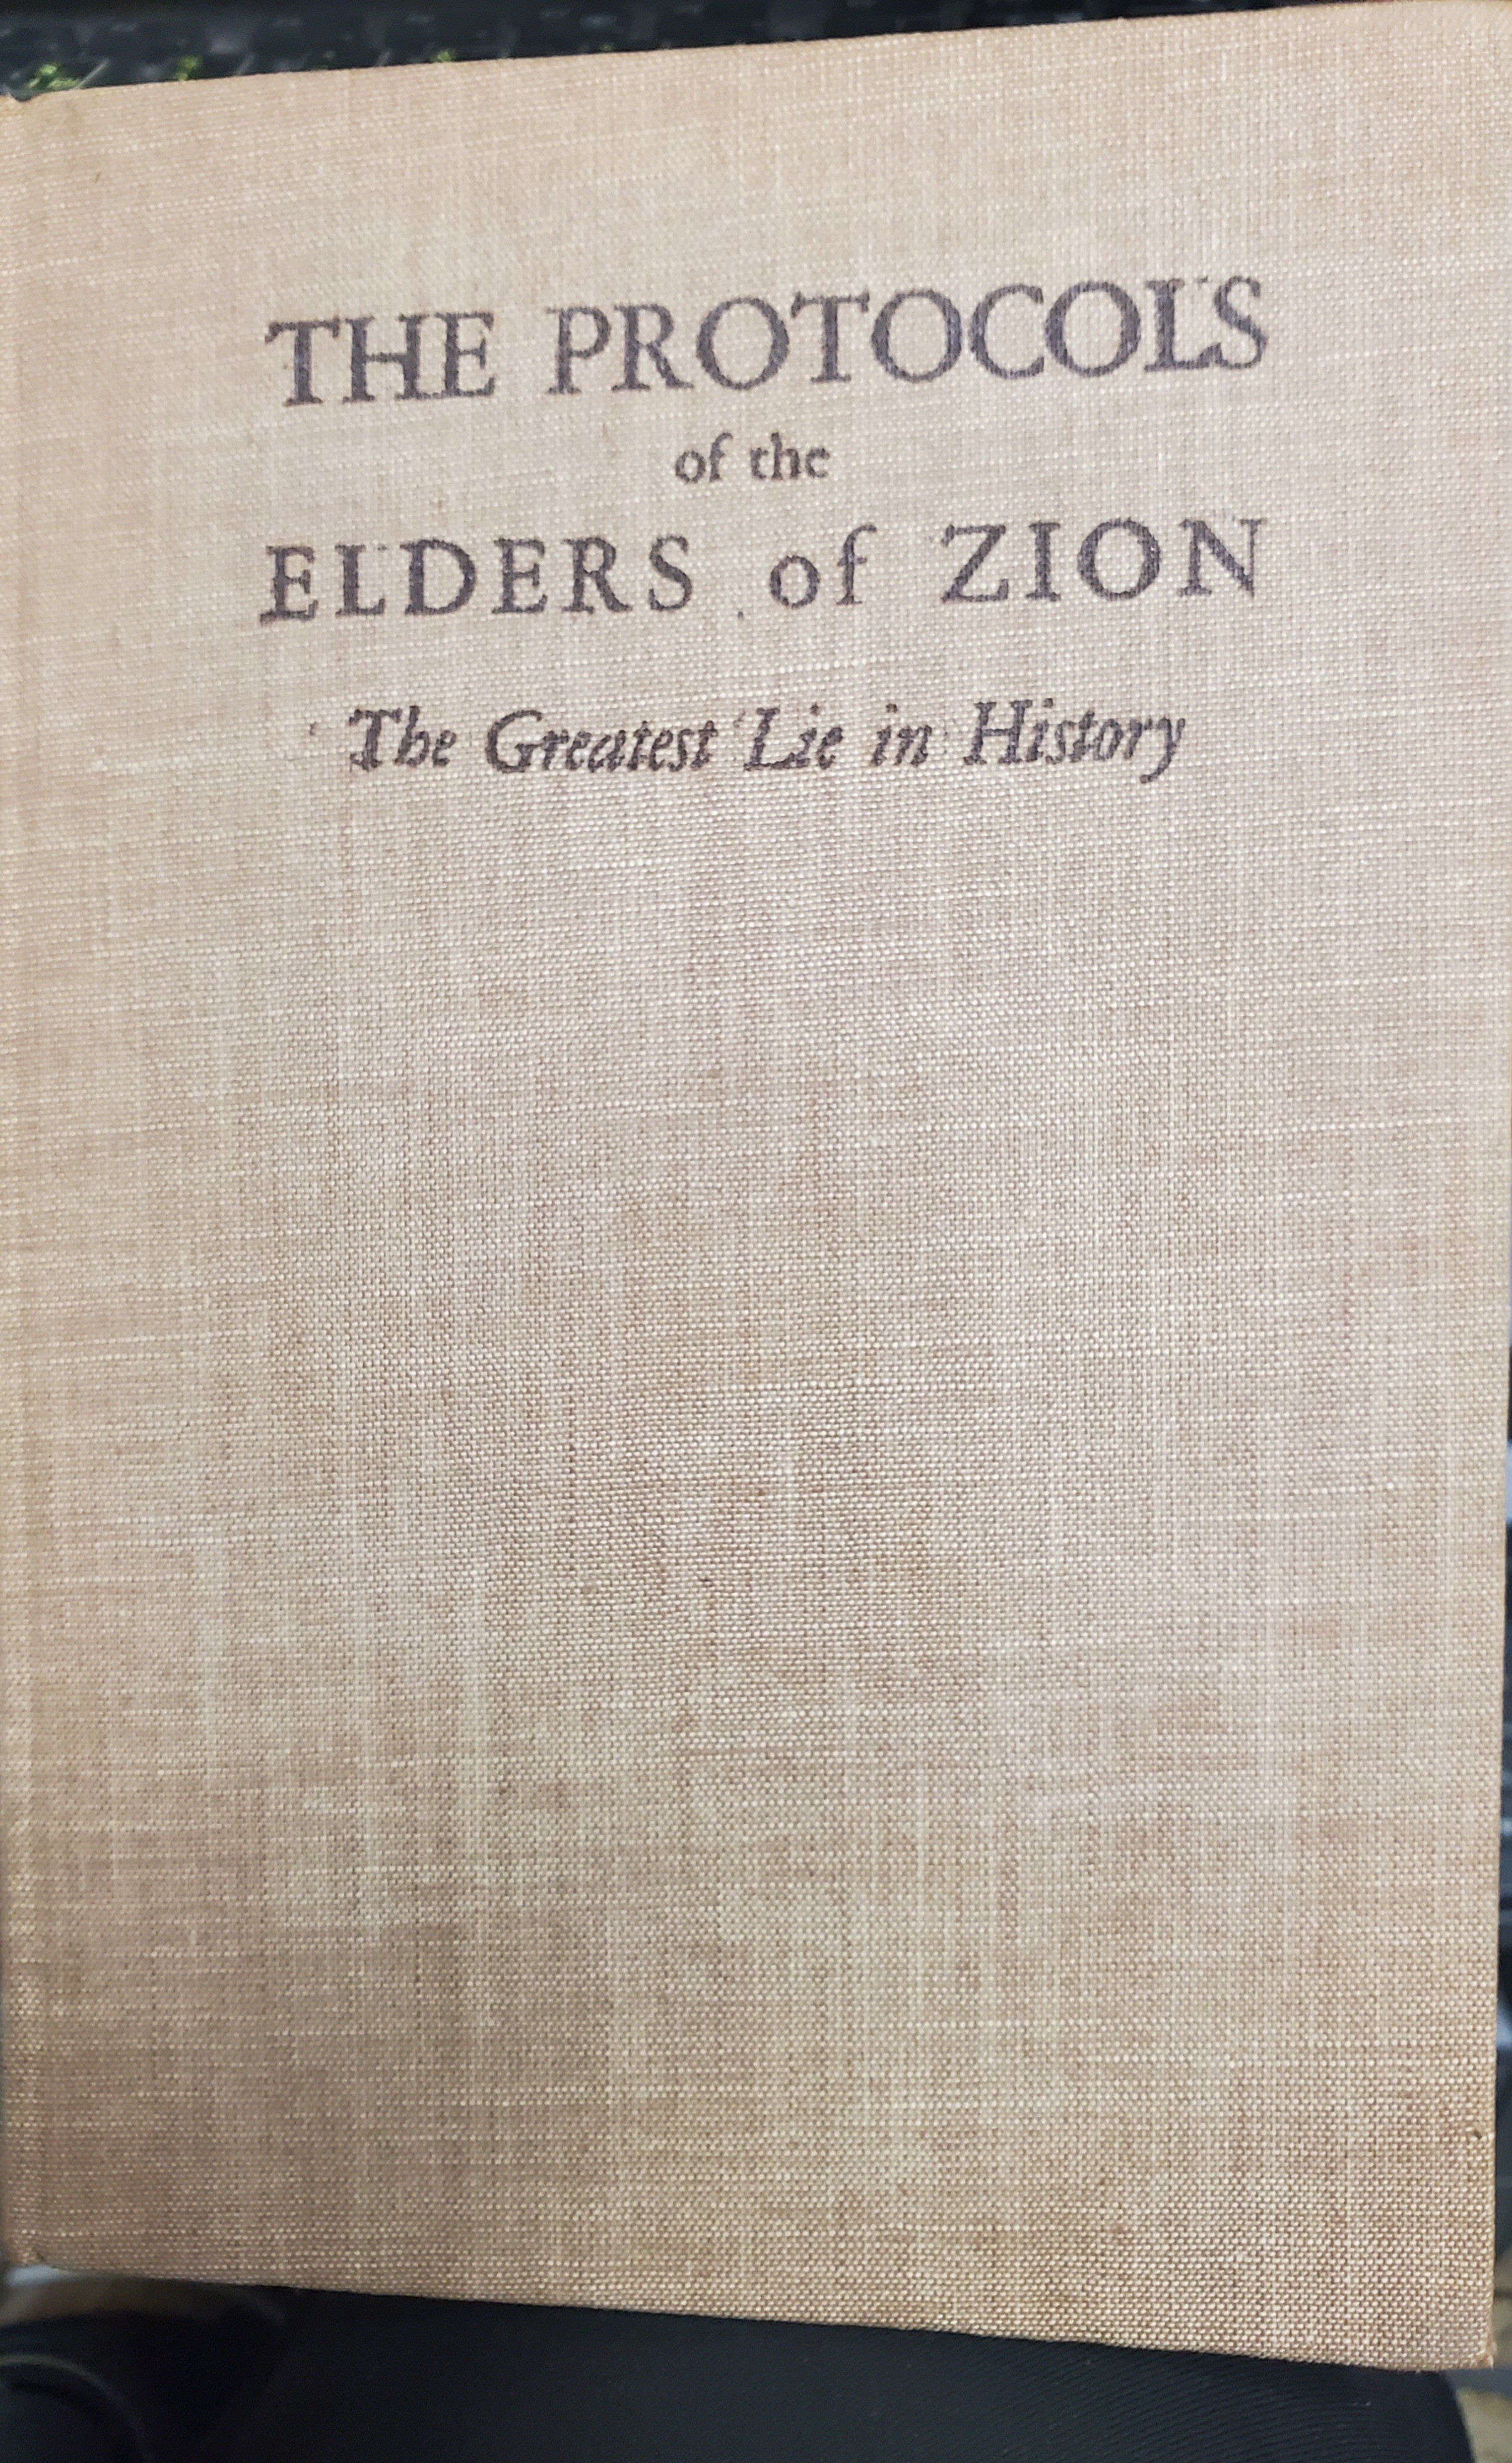 THE PROTOCOLS OF THE ELDERS OF ZION,THE GREATEST LIE IN HISTORY